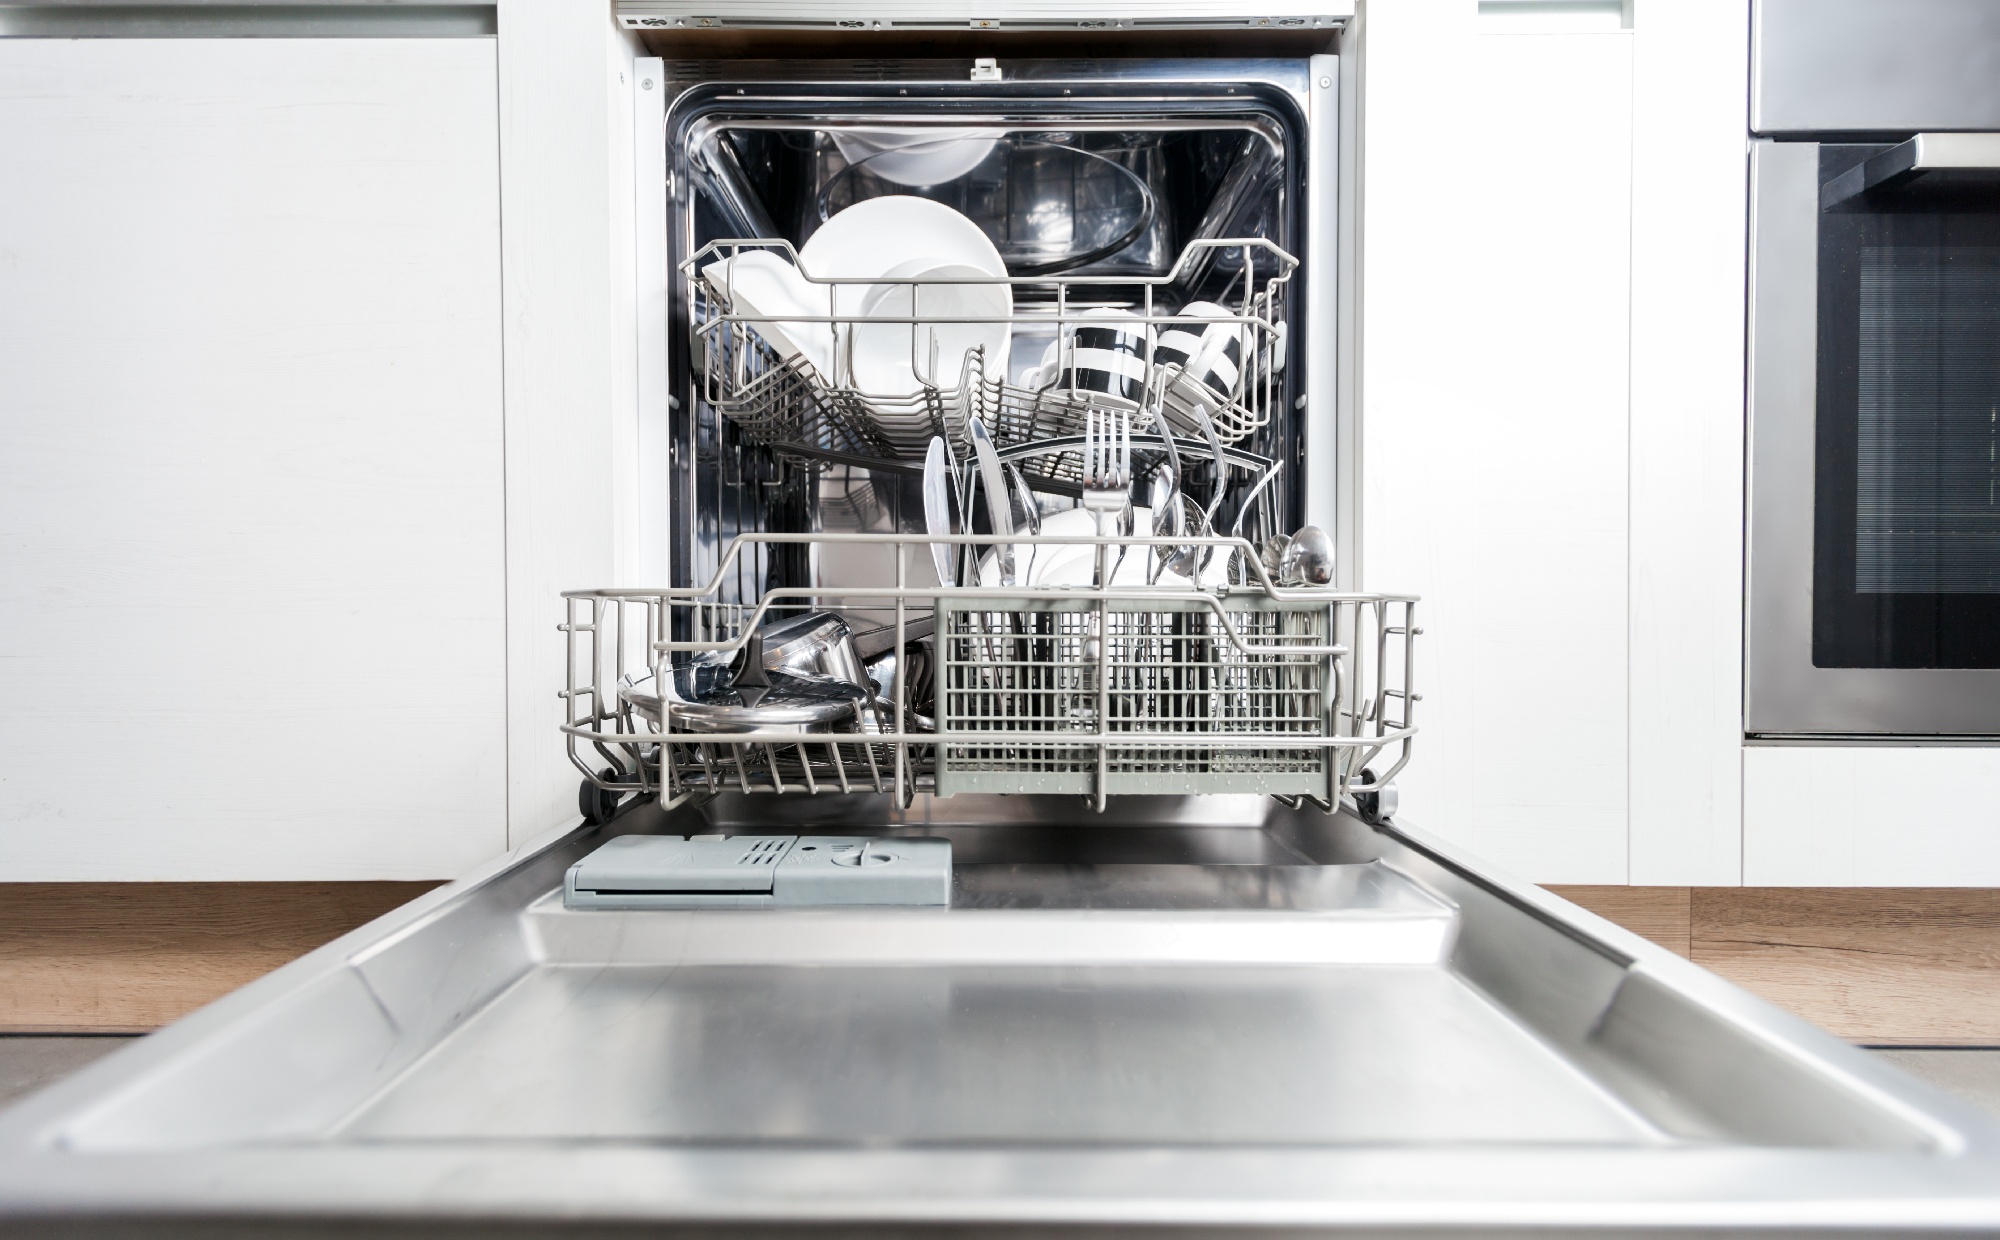 oase bark lol Dishwasher Repair KitchenAid: What Are Your Best Options?